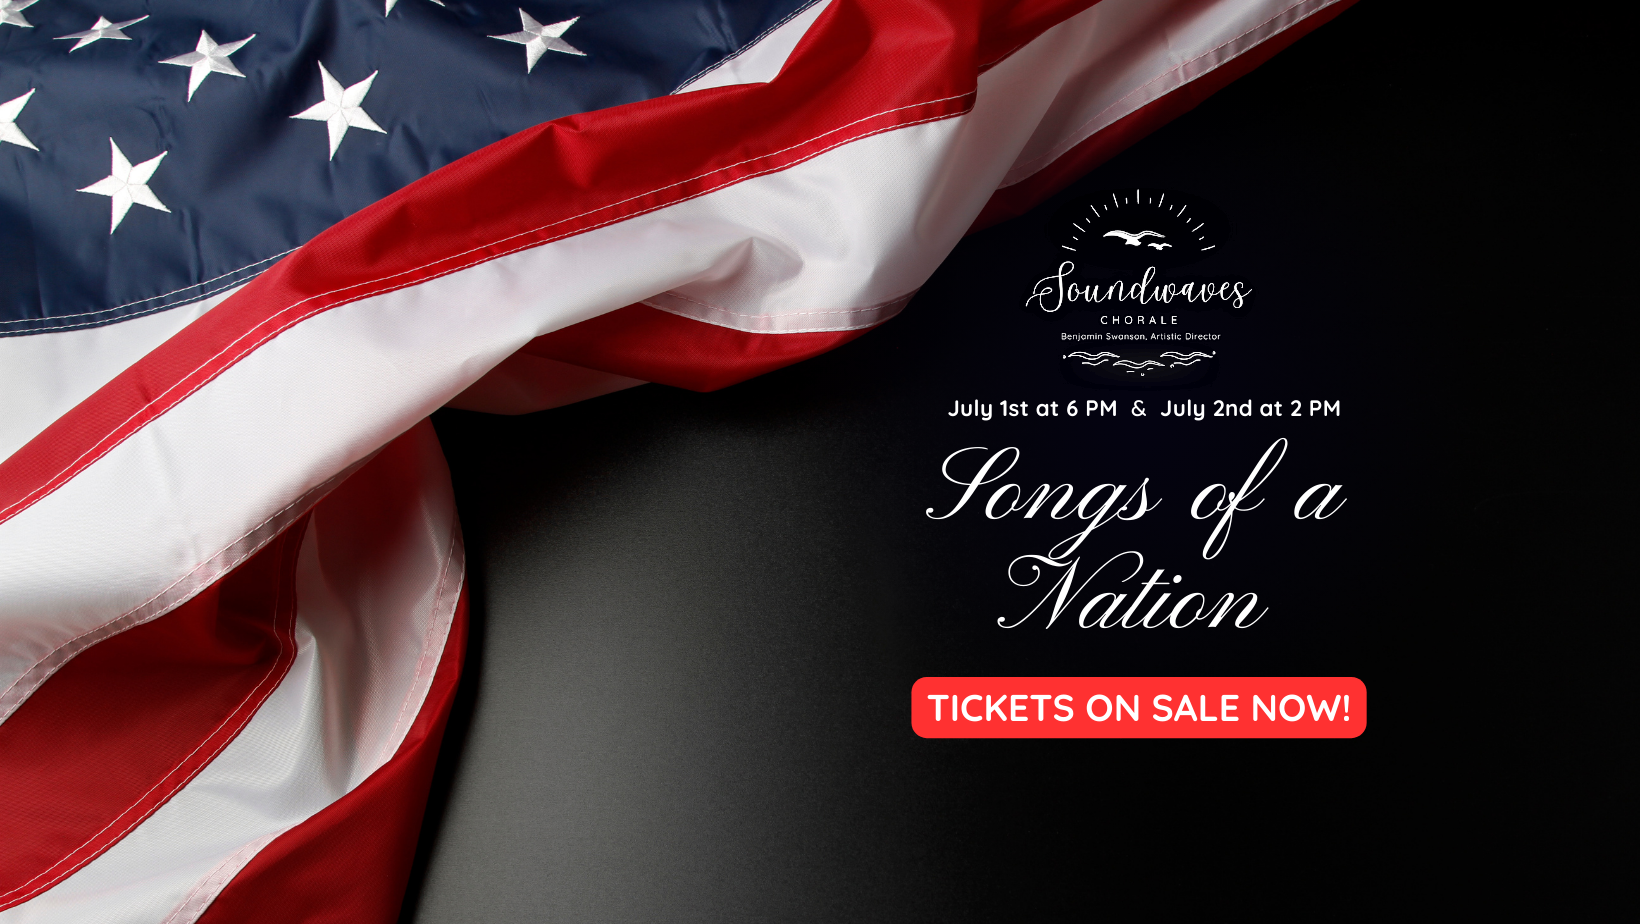 <h1 class="tribe-events-single-event-title">Songs of a Nation Concert</h1>